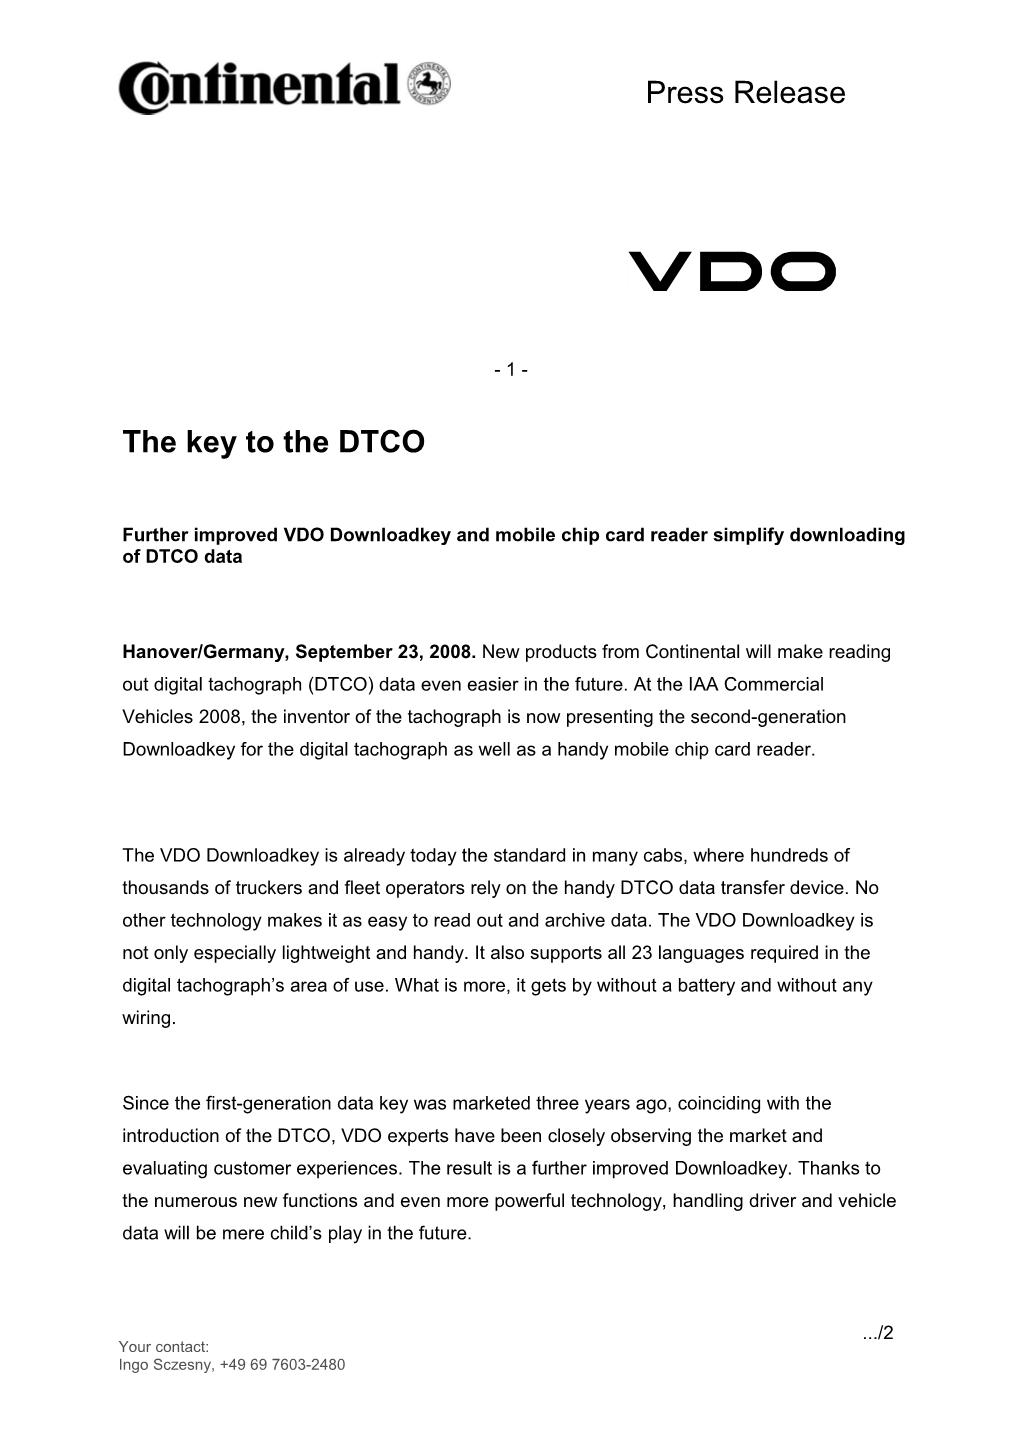 Further Improved VDO Downloadkey and Mobile Chip Card Reader Simplify Downloading of DTCO Data